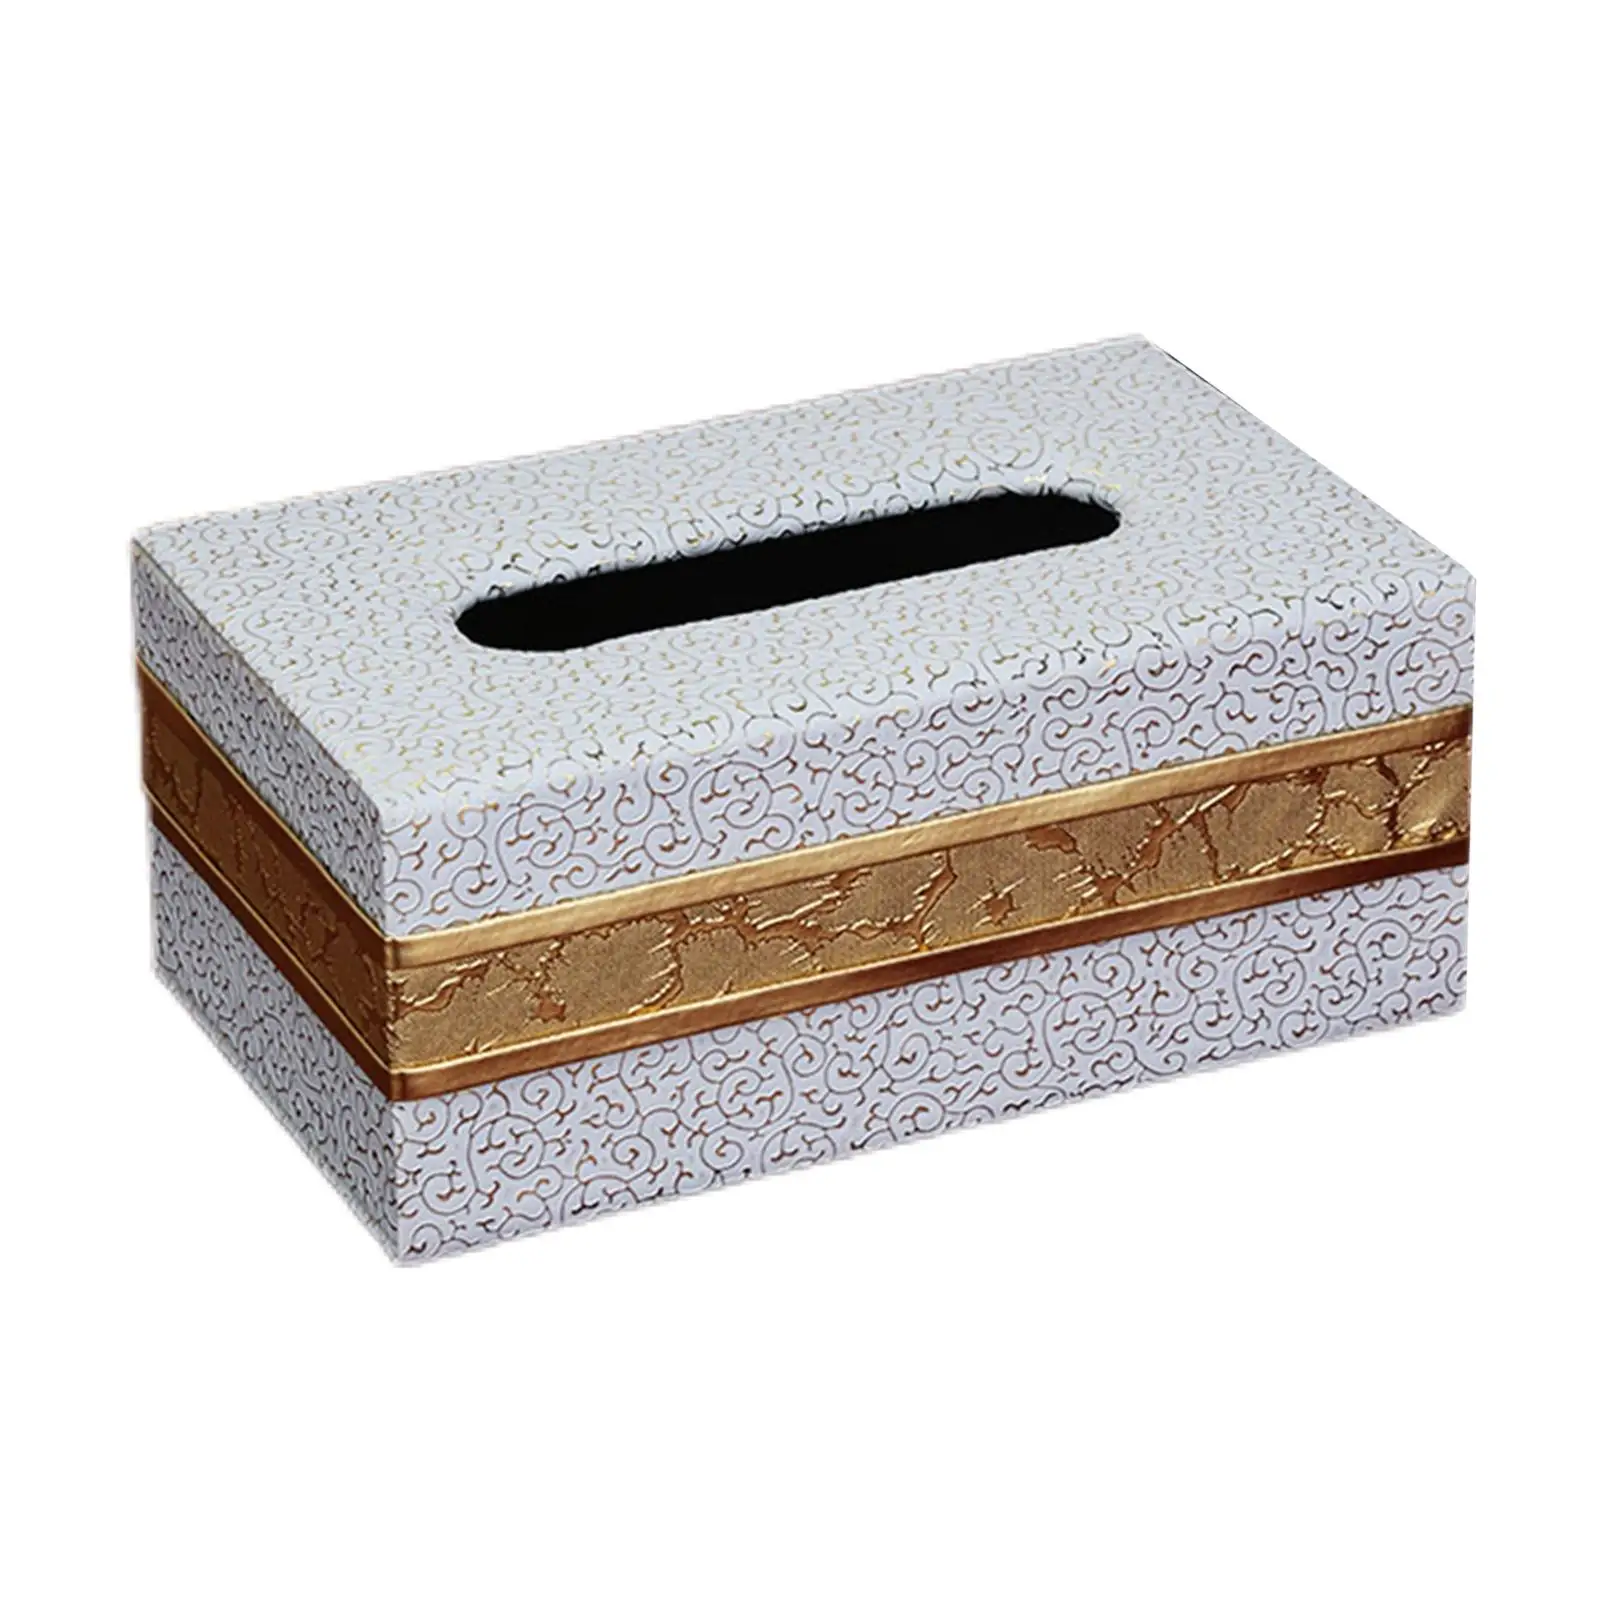 Stylish PU Leather Tissue Box Holder Organizer Rectangular Tissue Box Cover for Hotel Vanity Countertop Home Table Decor